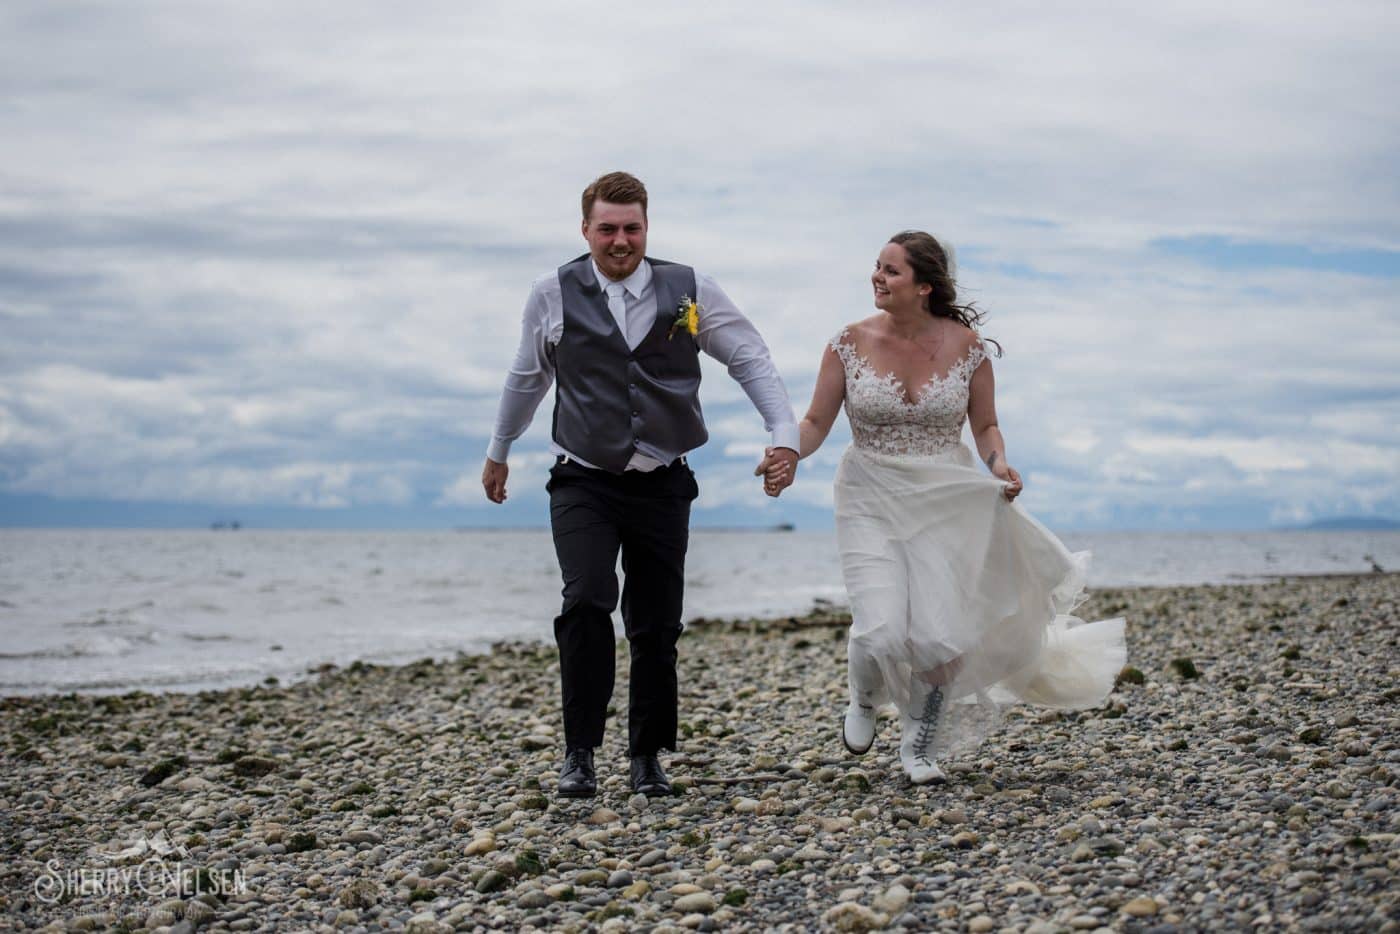 Shane and Shelby's Sechelt wedding included a run along the beach in happiness for the wedding photos for their Sechelt BC wedding